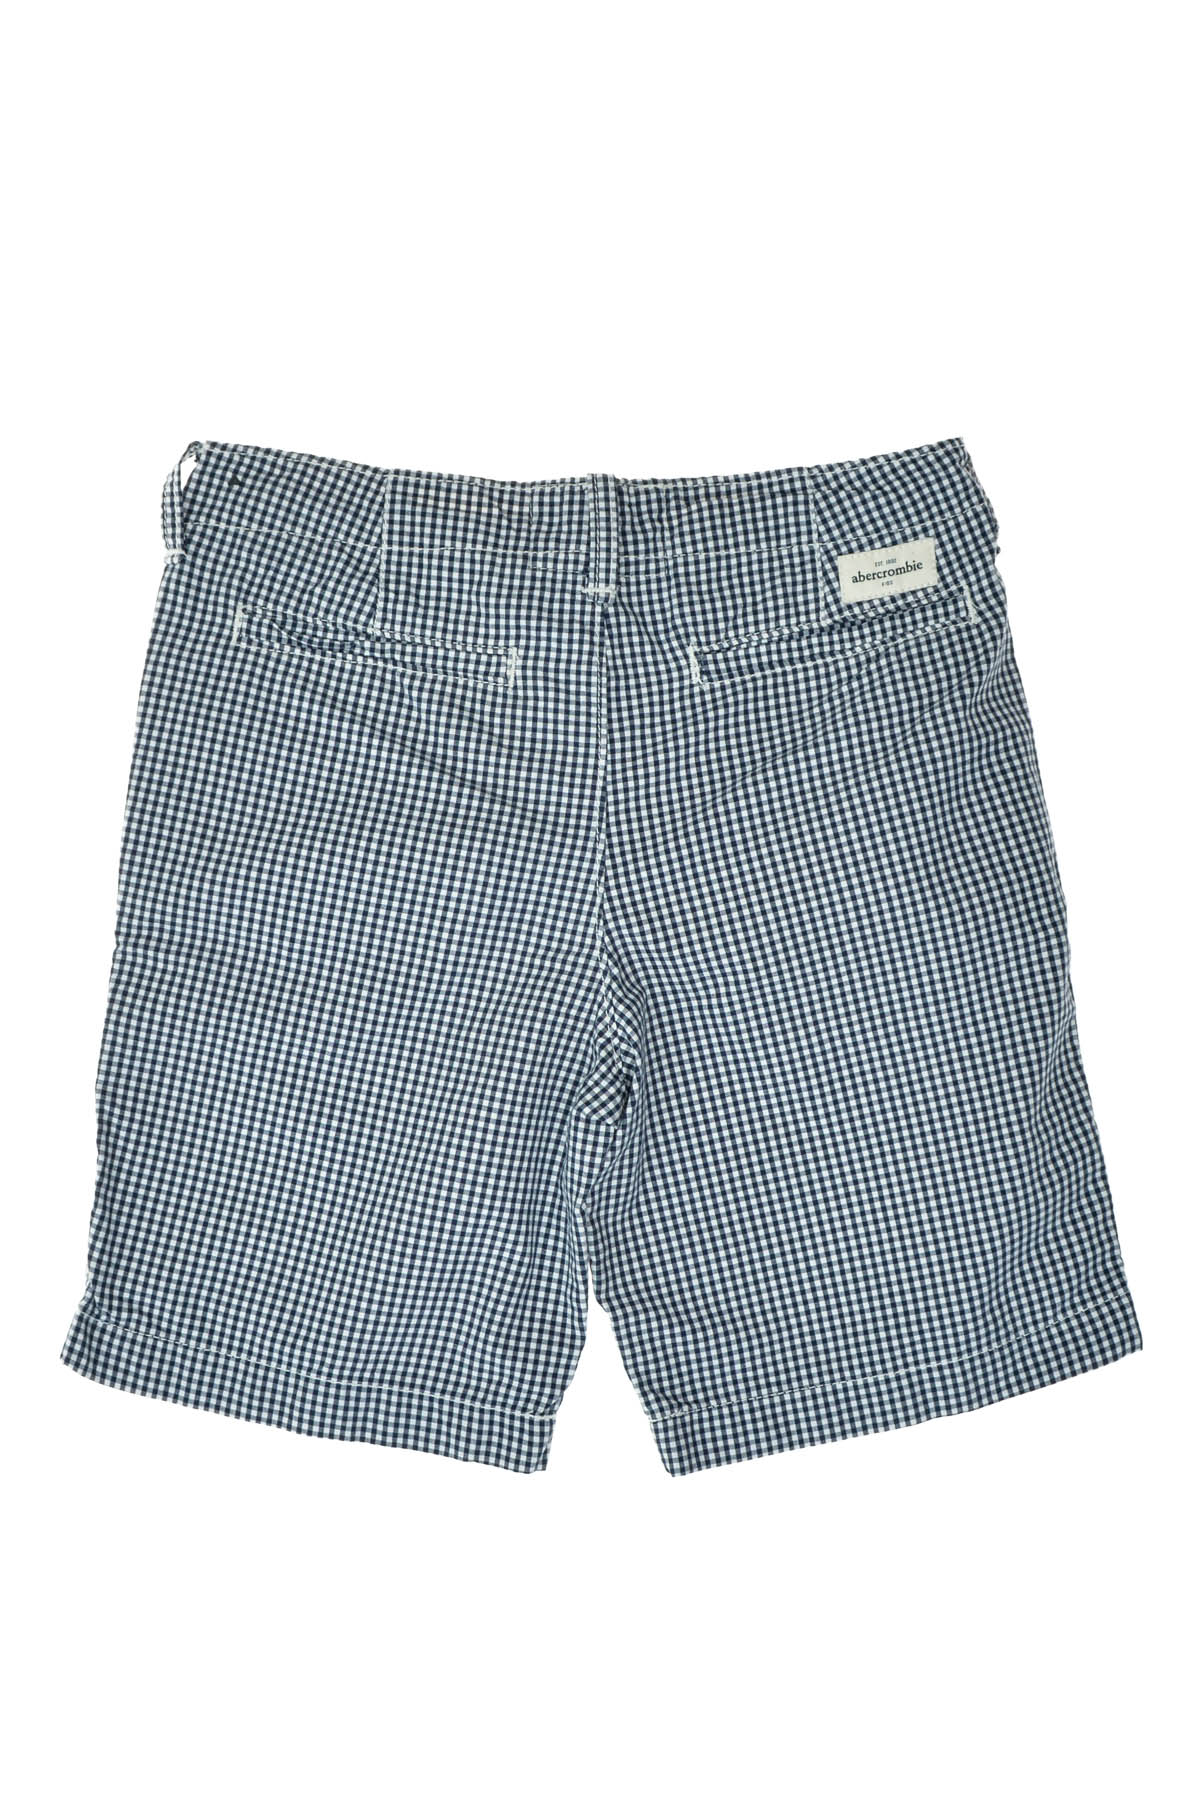 Shorts for boys - Abercrombie & Fitch - 1